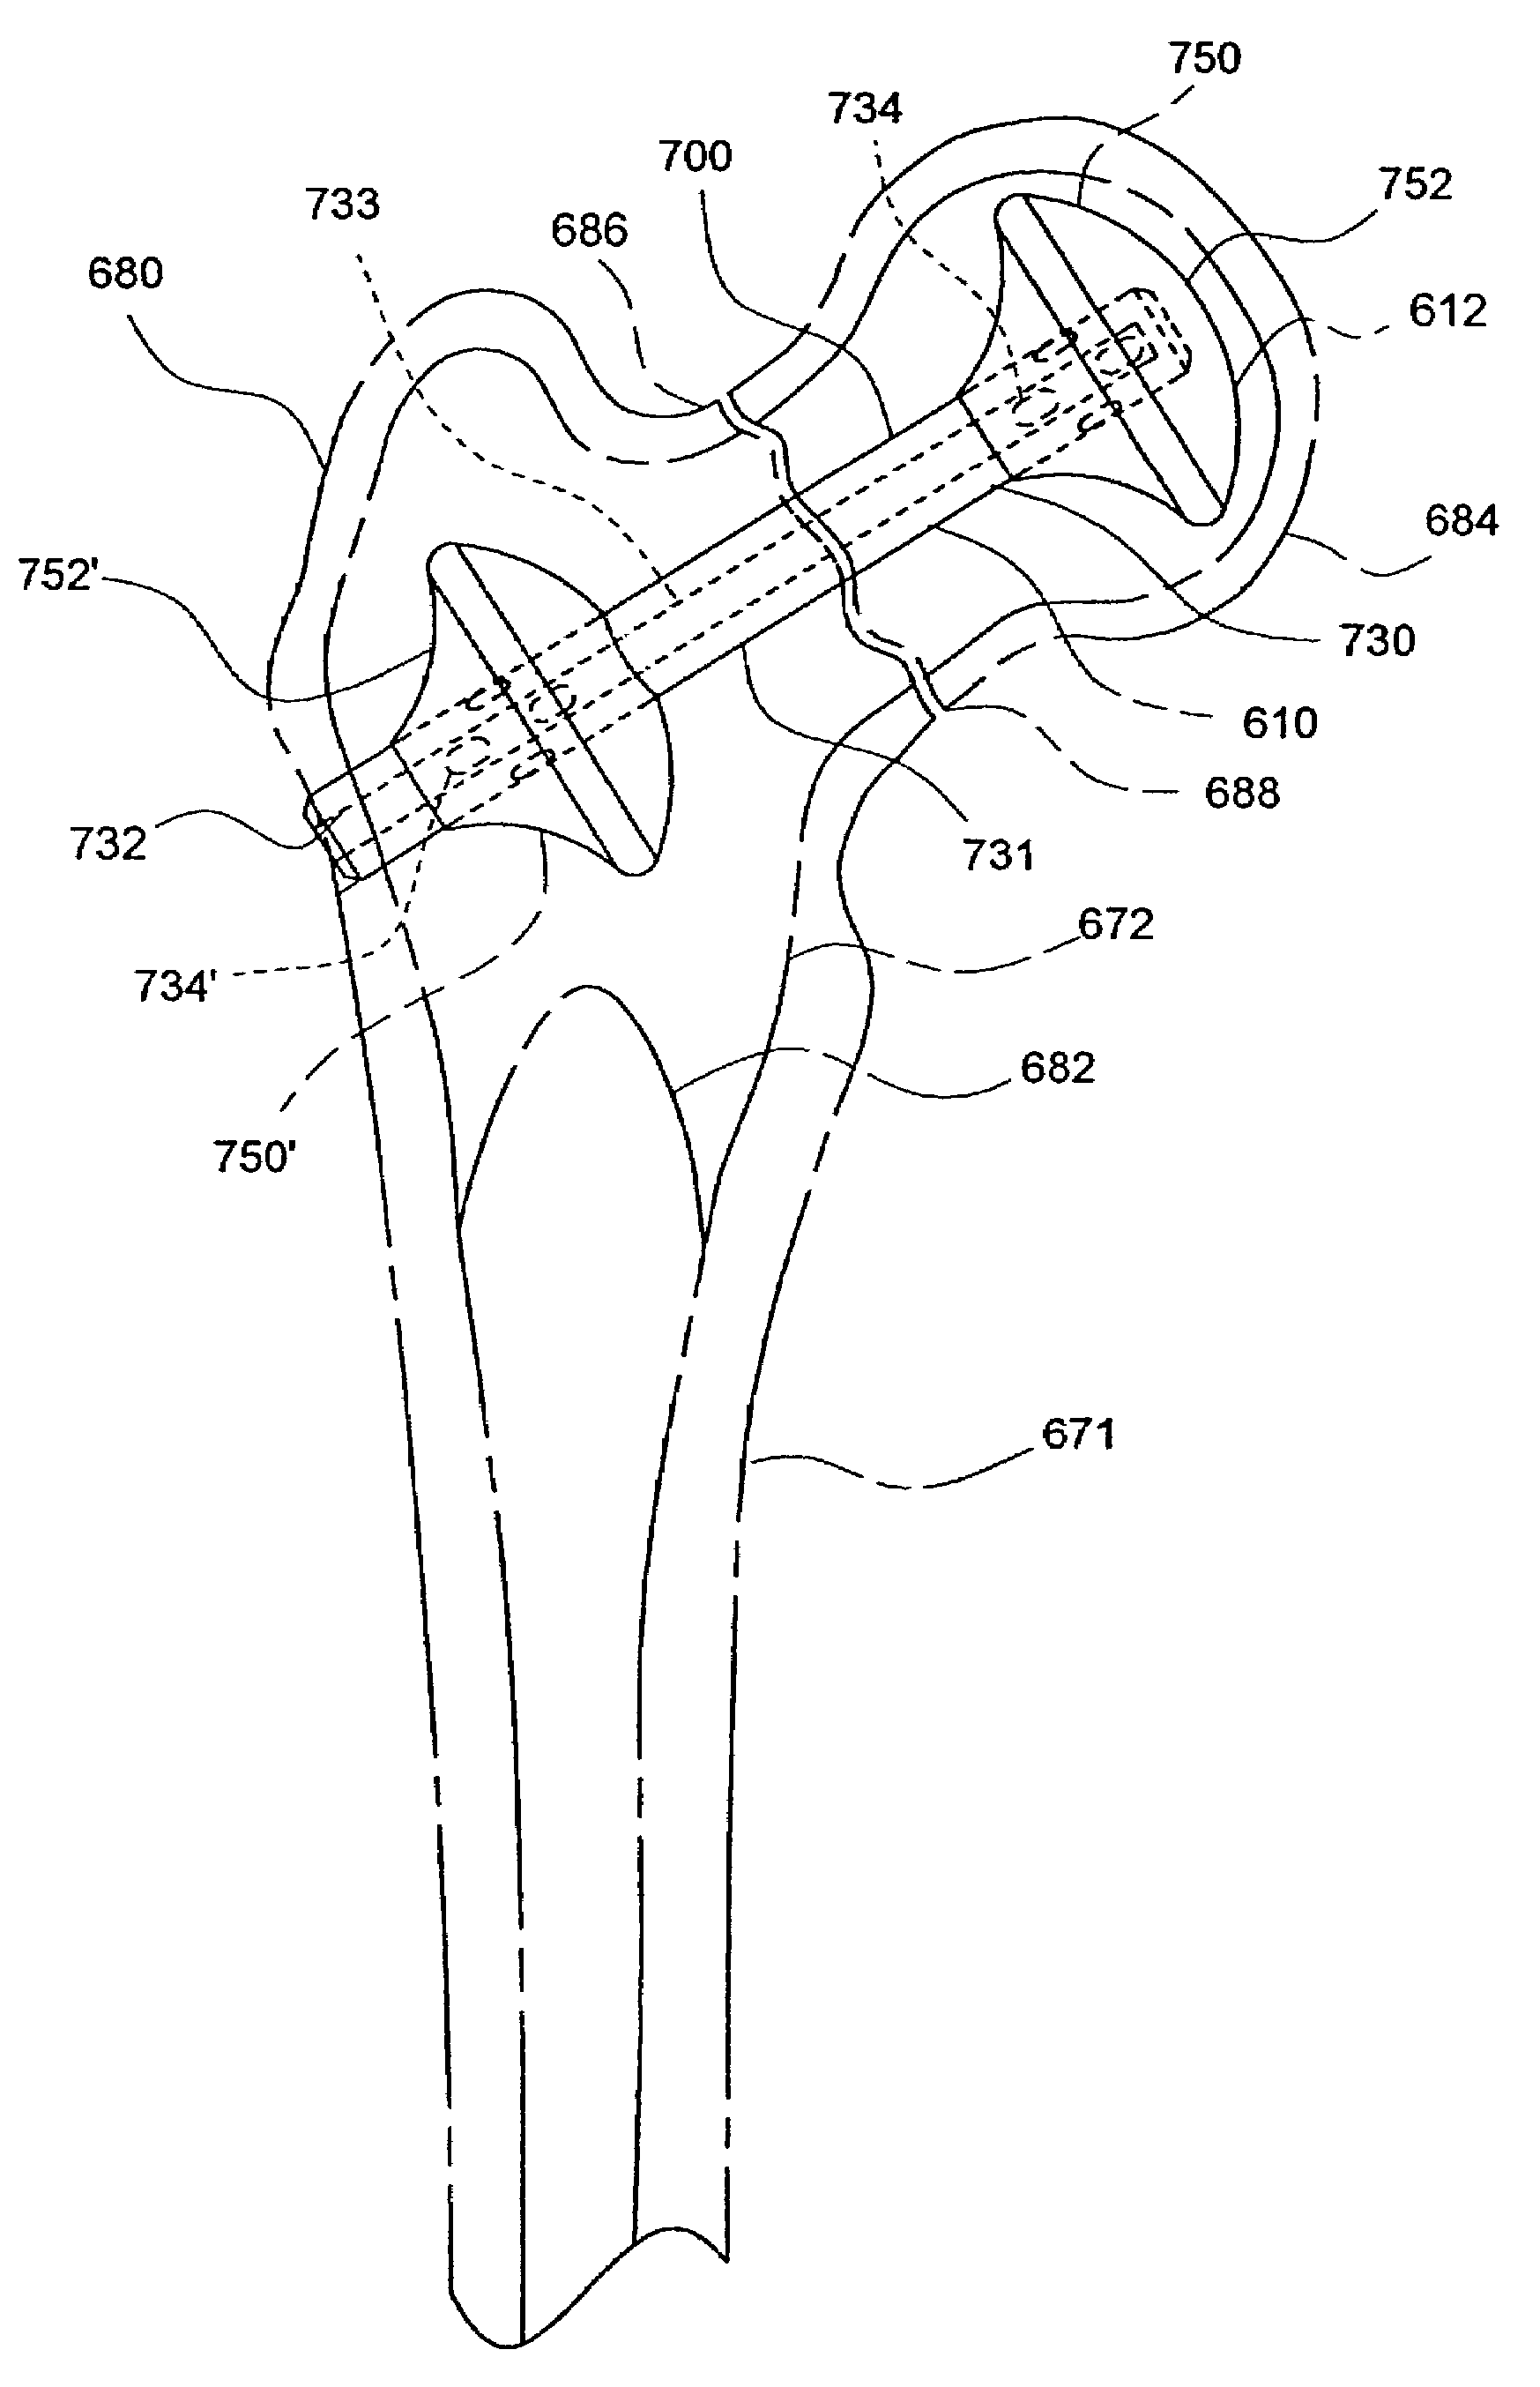 Orthopaedic implant fixation using an in-situ formed anchor